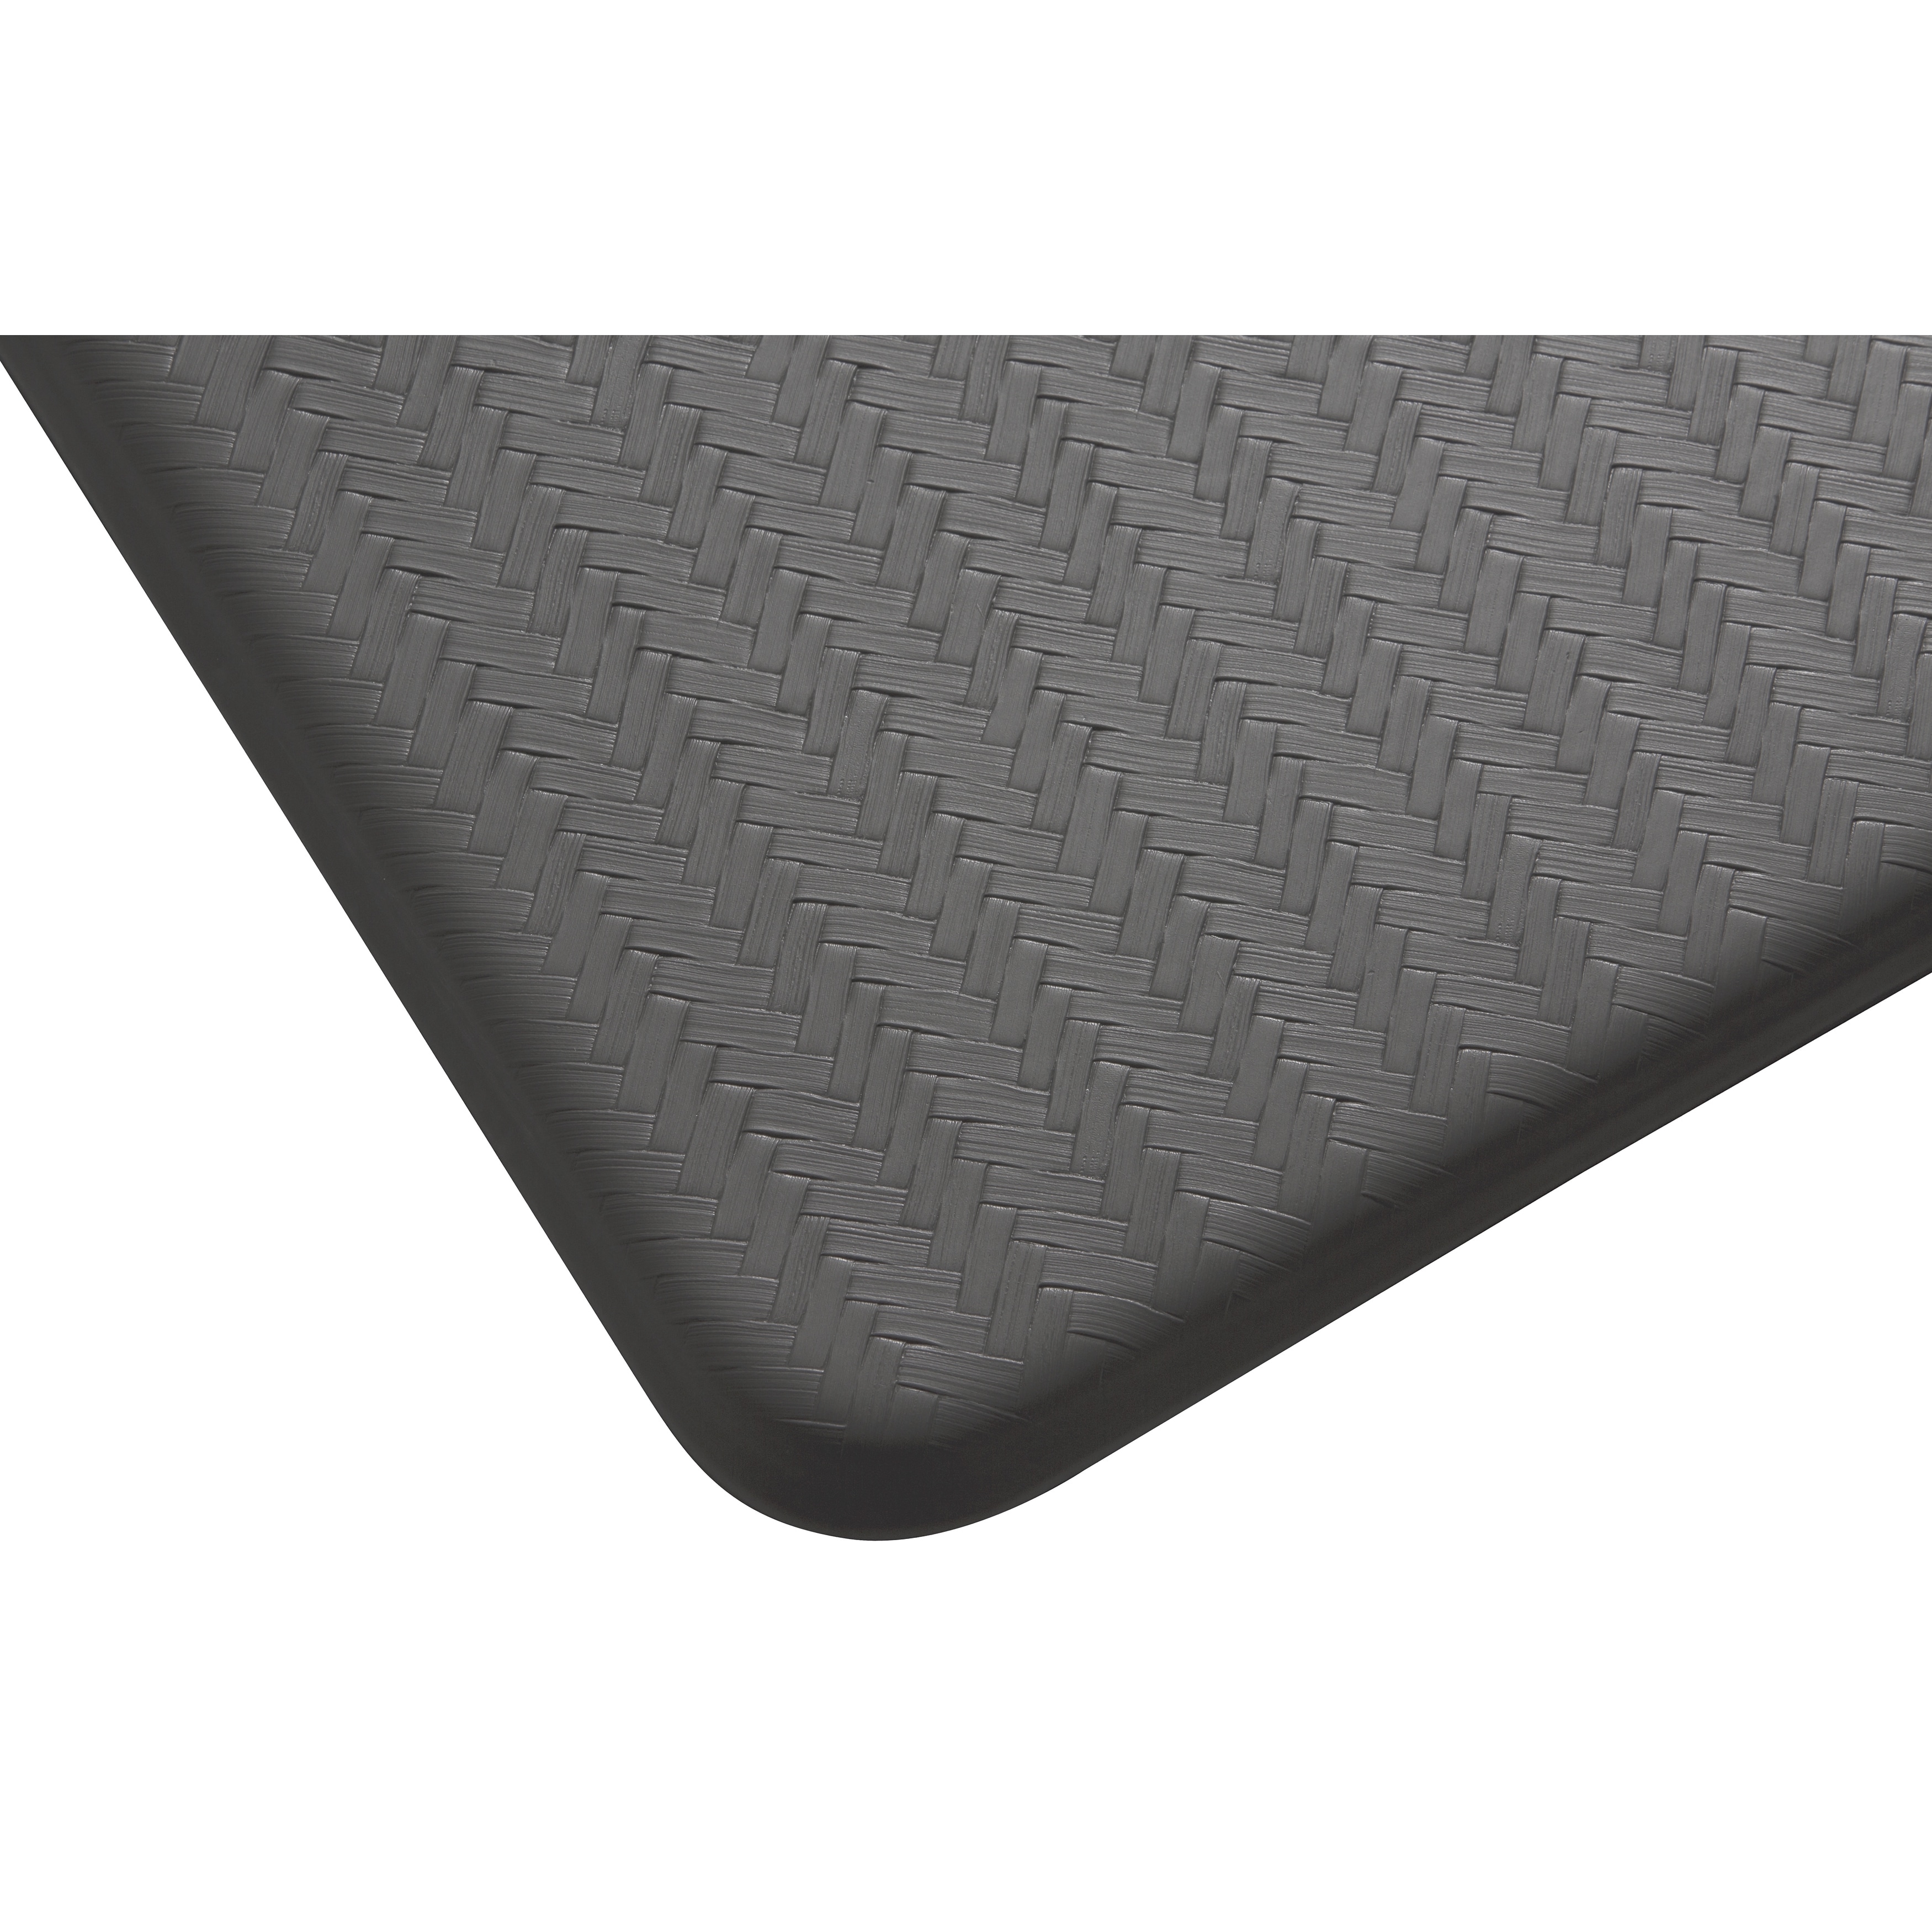 Imprint Comfort Mats For Body And Sole With Cushion Core 20” X 30” X 3/4”